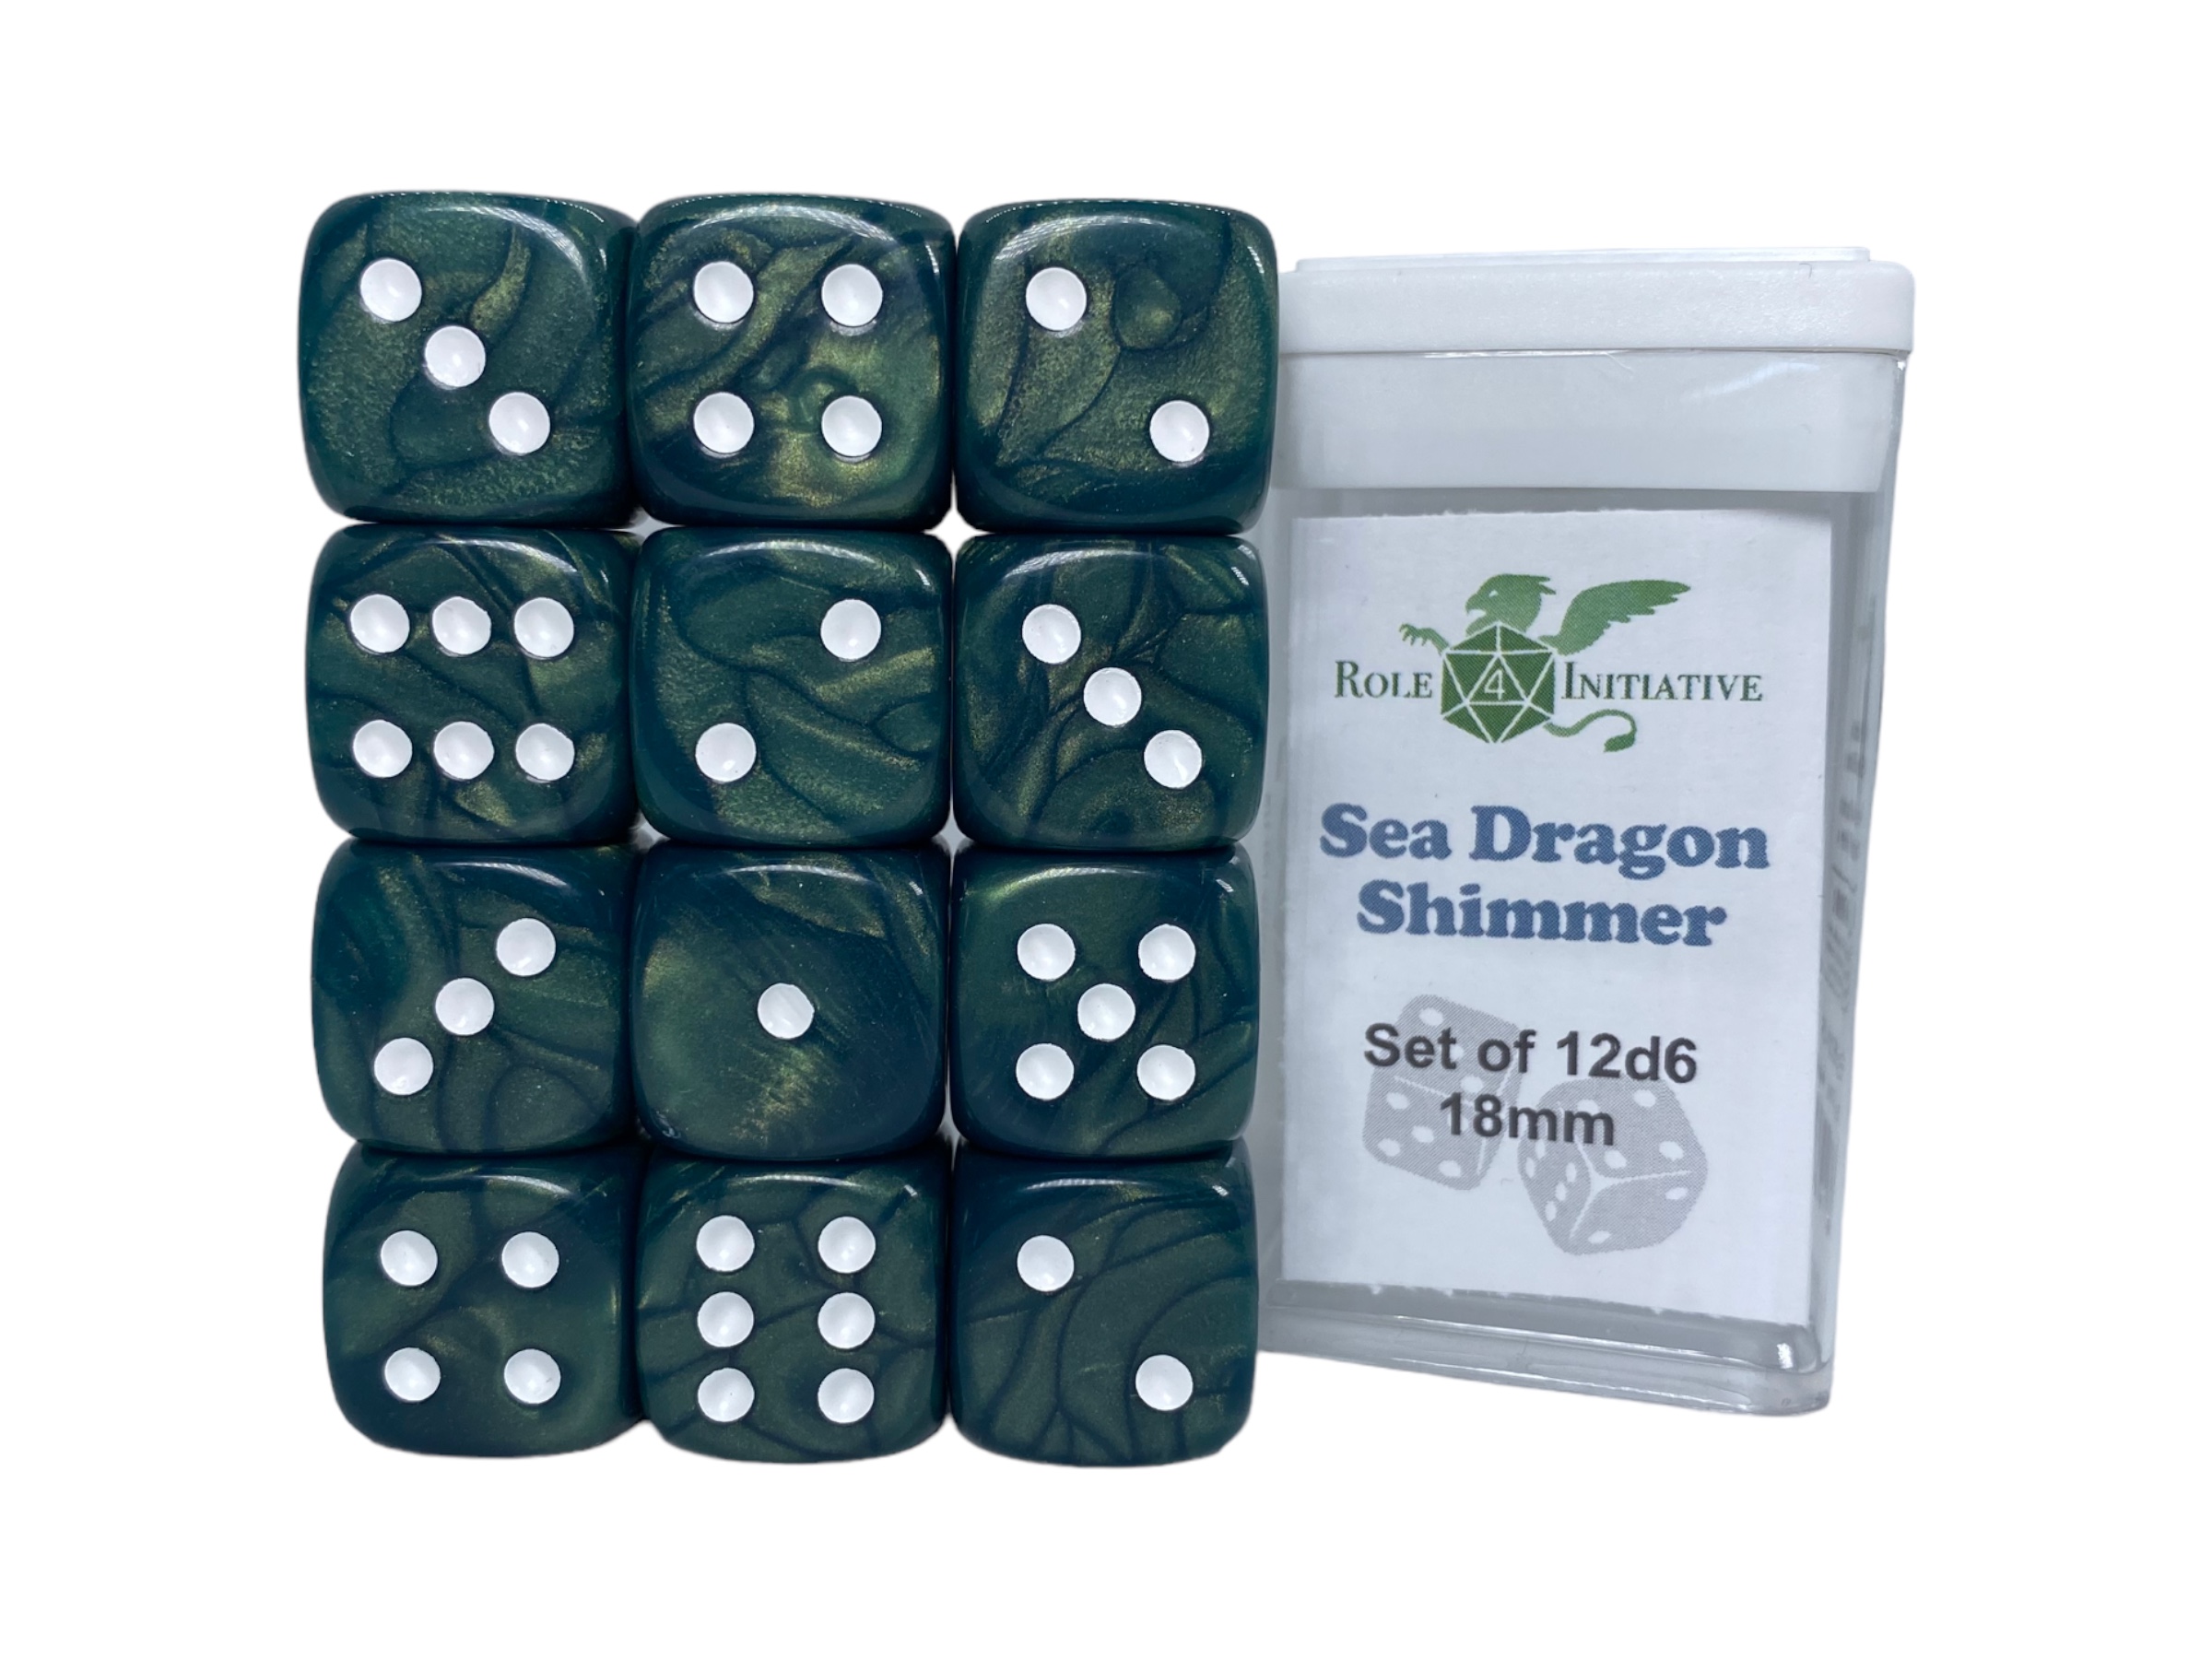 Role 4 Initiative: 12 D6 Pips Dice Set: Sea Dragon Shimmer 18MM 